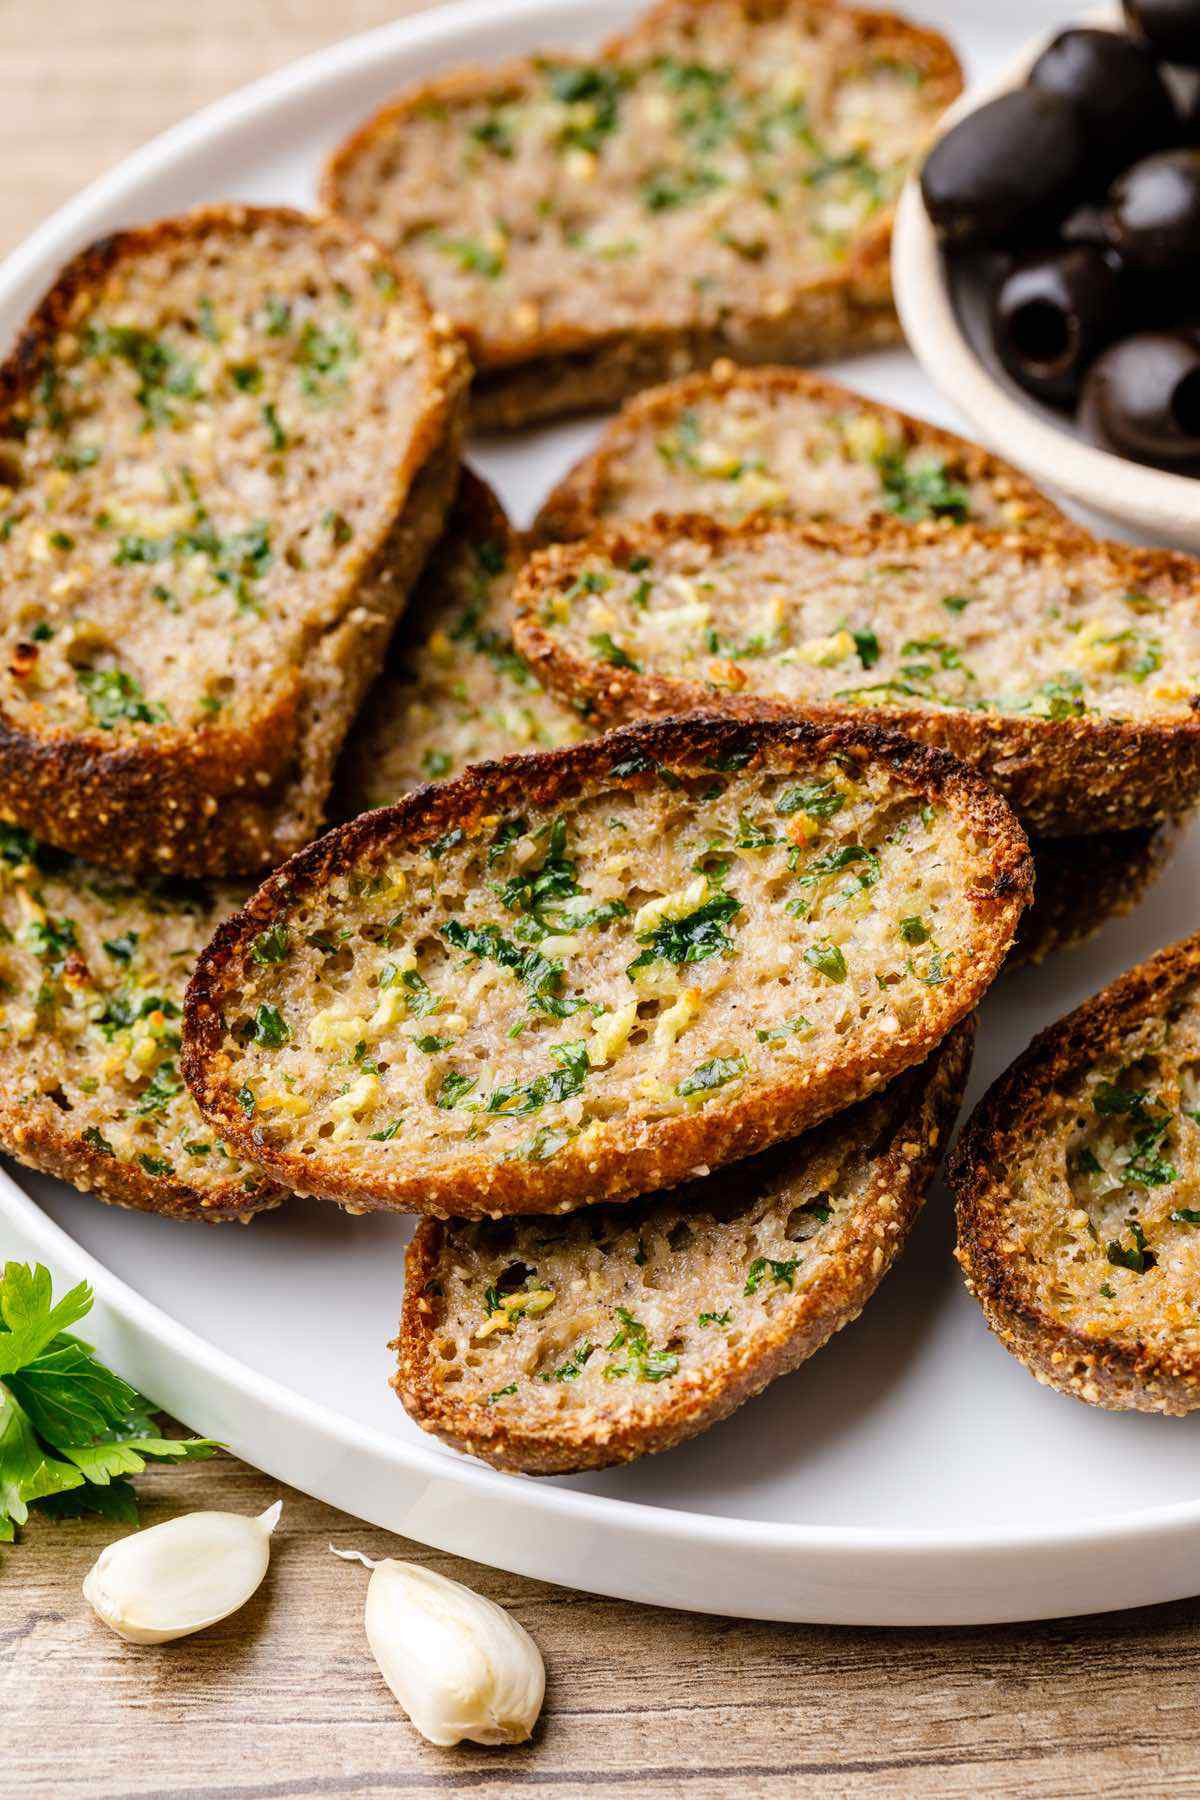 Paleo Garlic Bread Lovely How to Make the Best Low Carb Paleo Garlic Bread Healthy